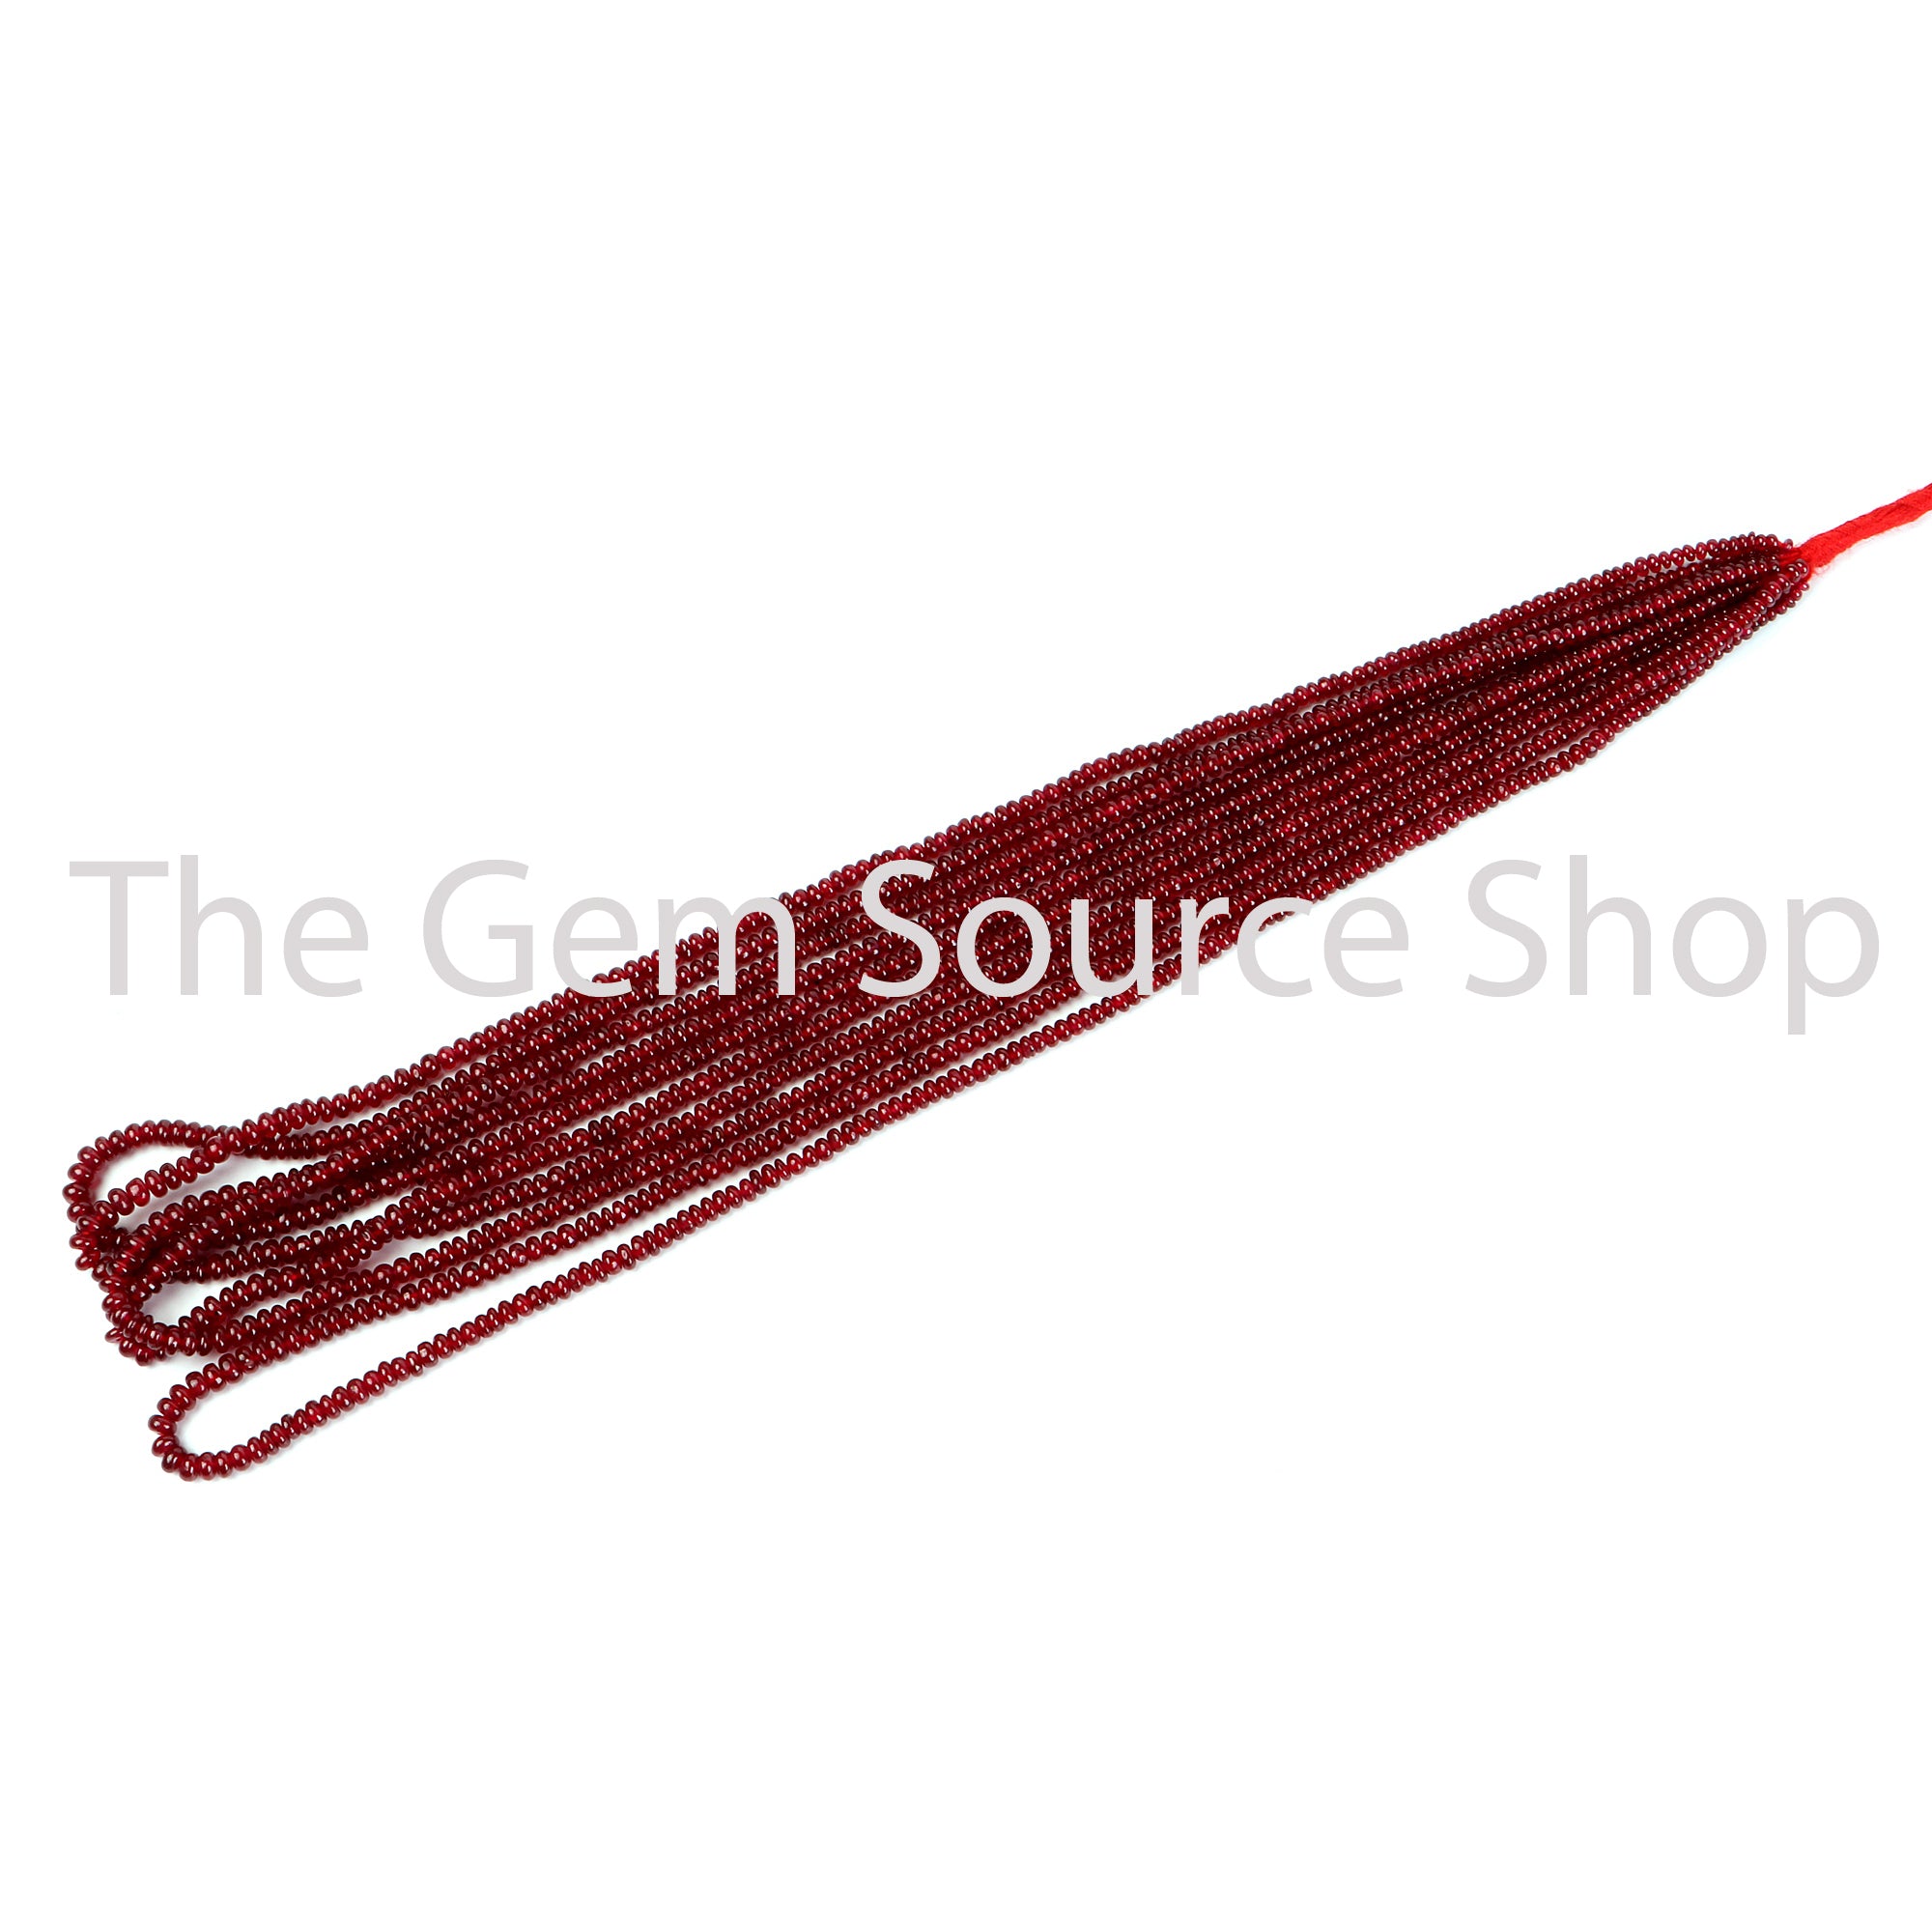 Ruby Smooth Rondelle Shape Gemstone Beads TGS-2459